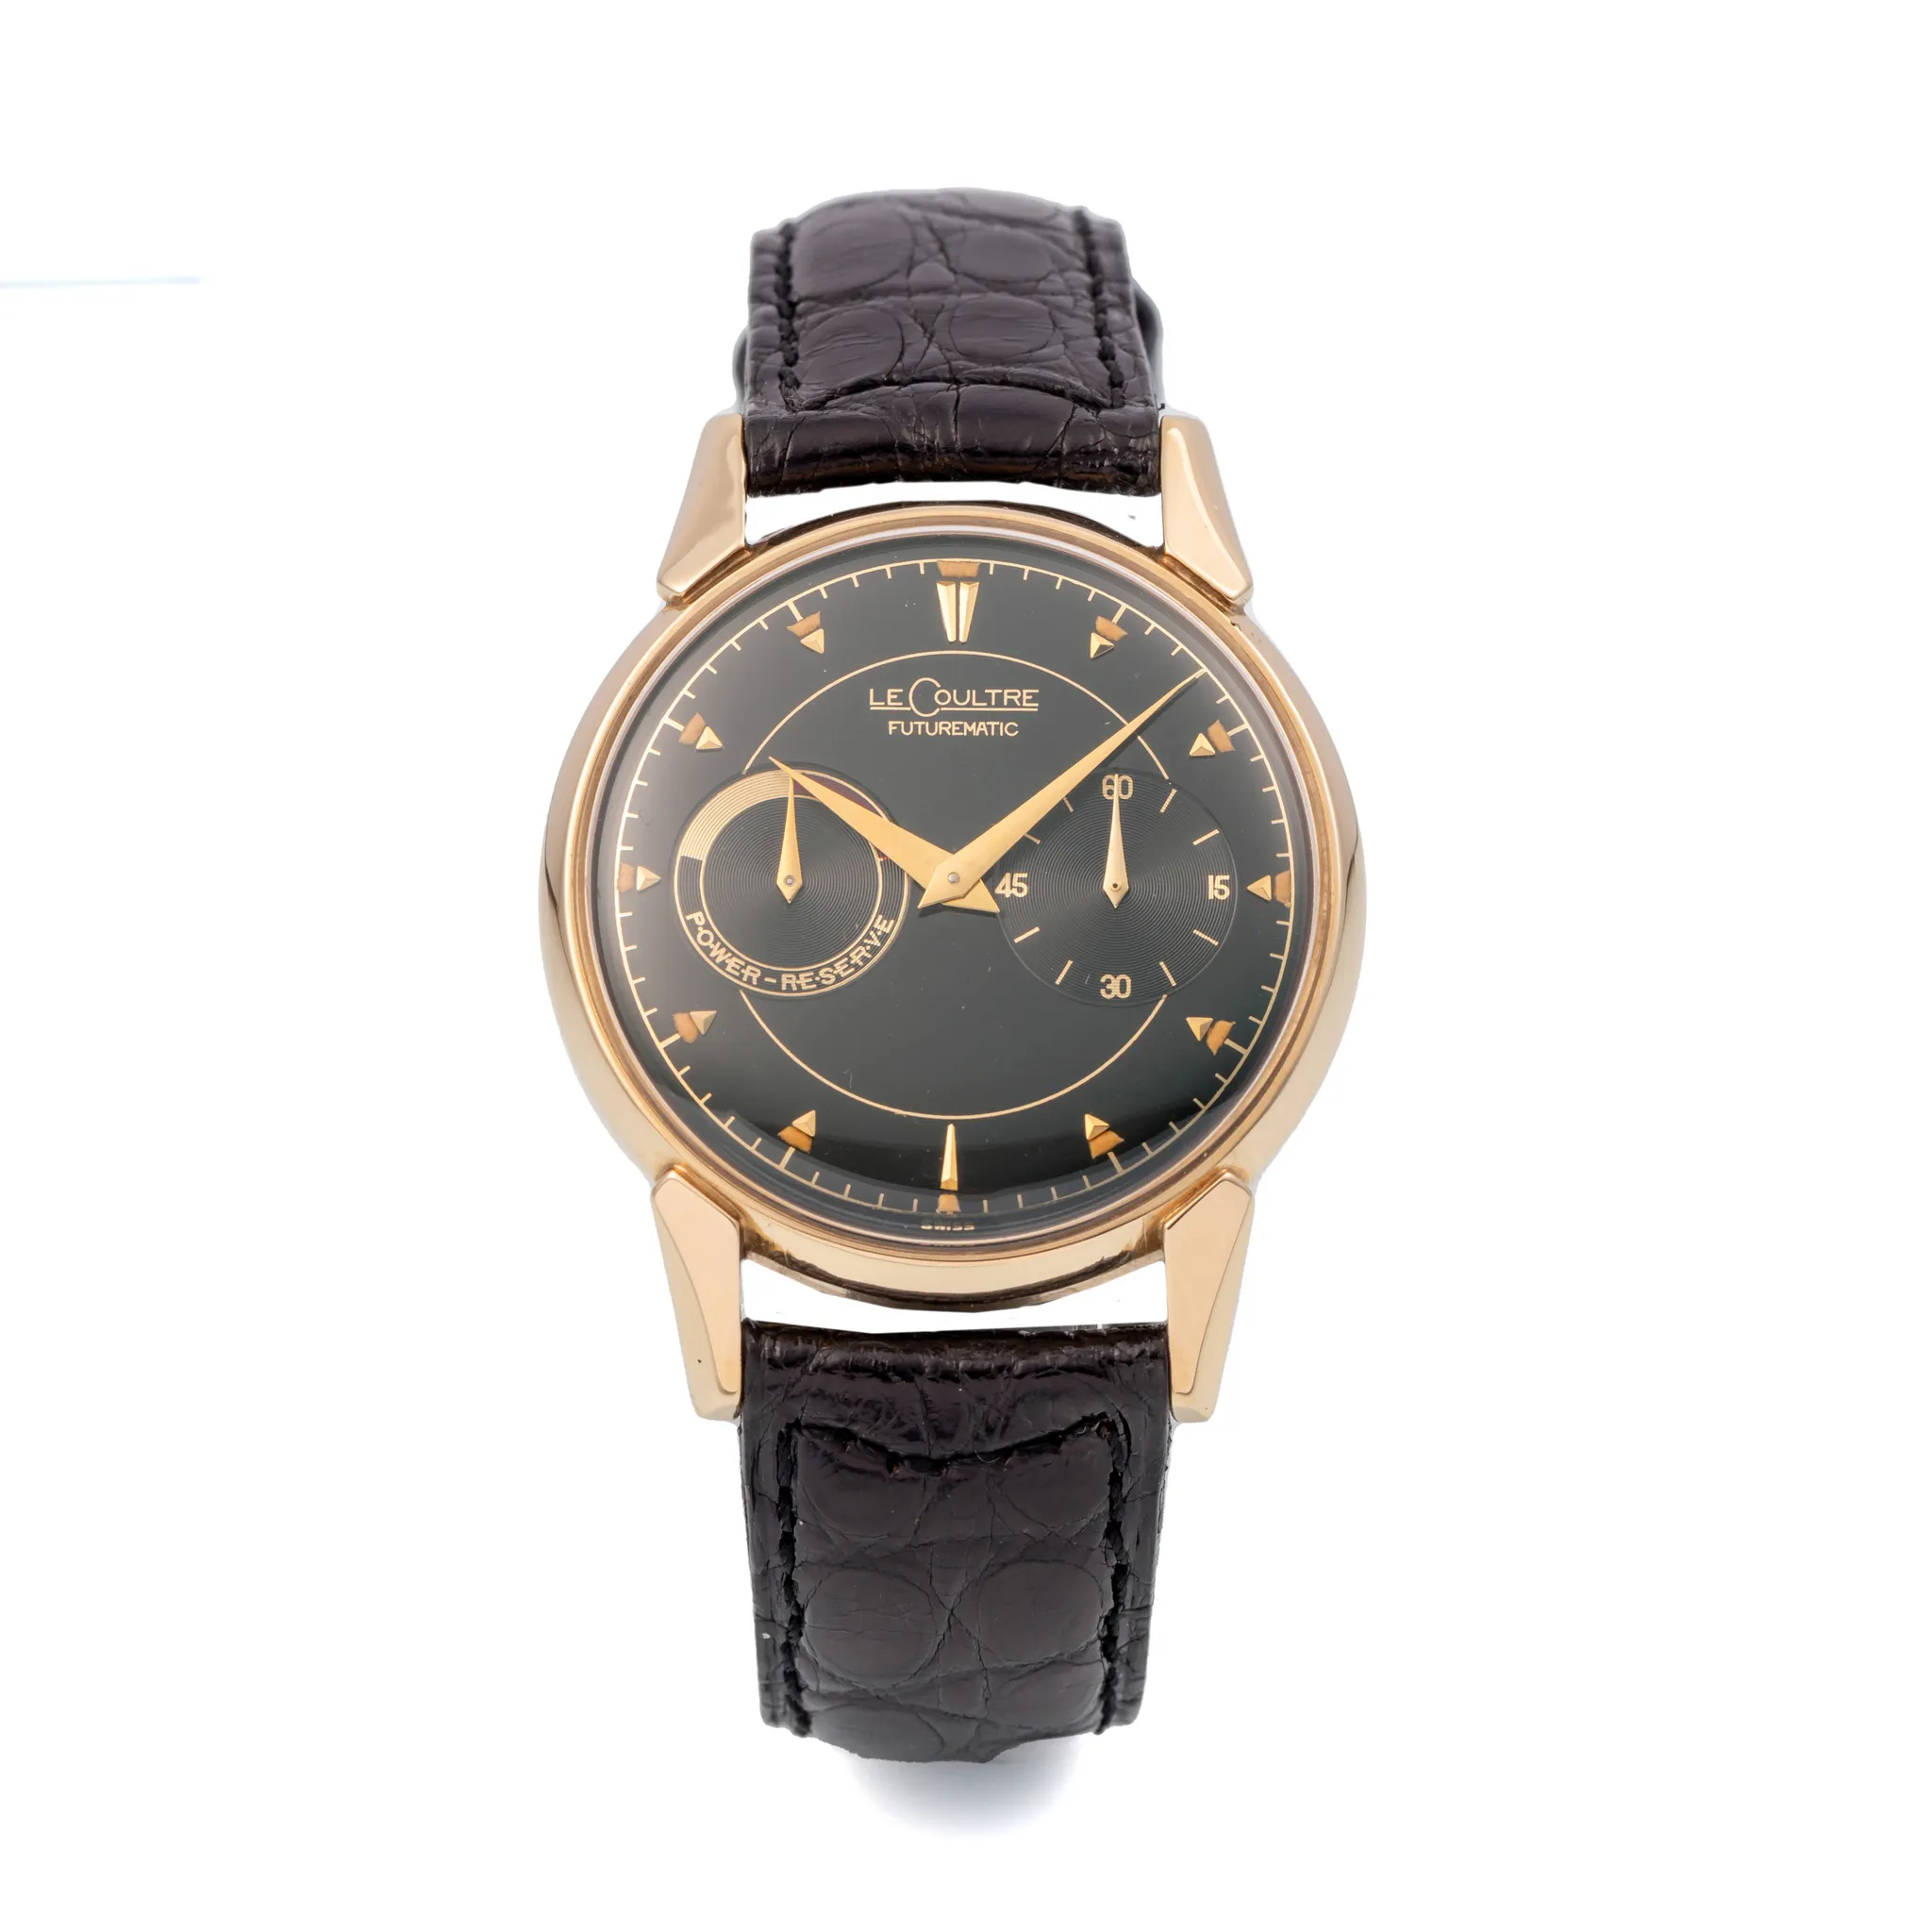 Jaeger-LeCoultre Futurematic 35mm Yellow gold Black